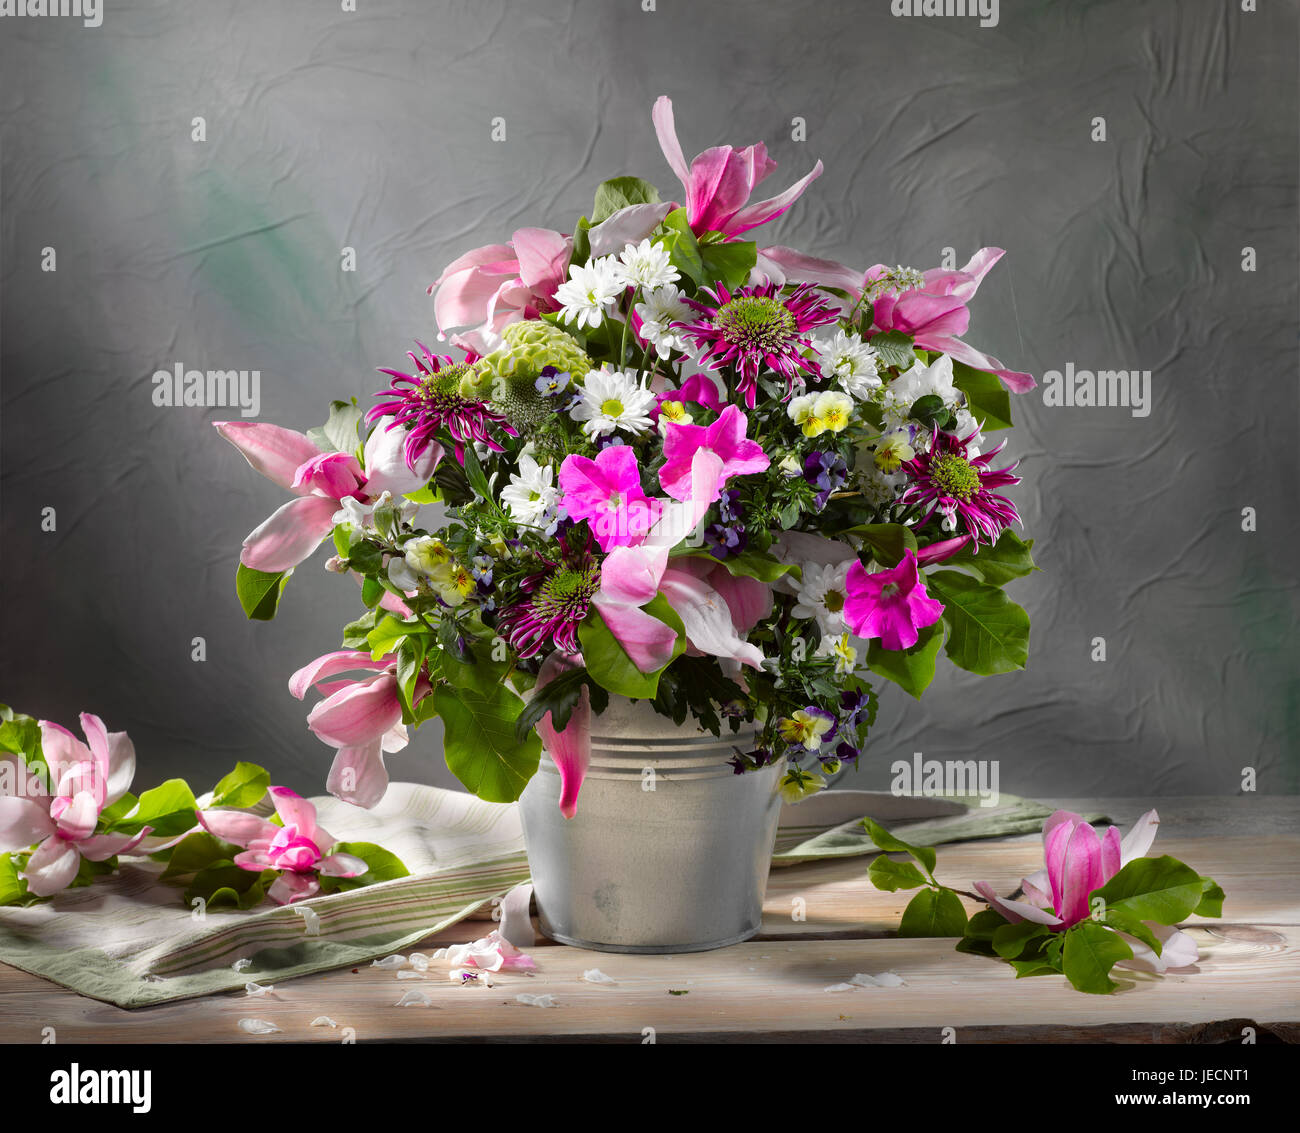 Bouquet of flowers with magnolias. Stock Photo